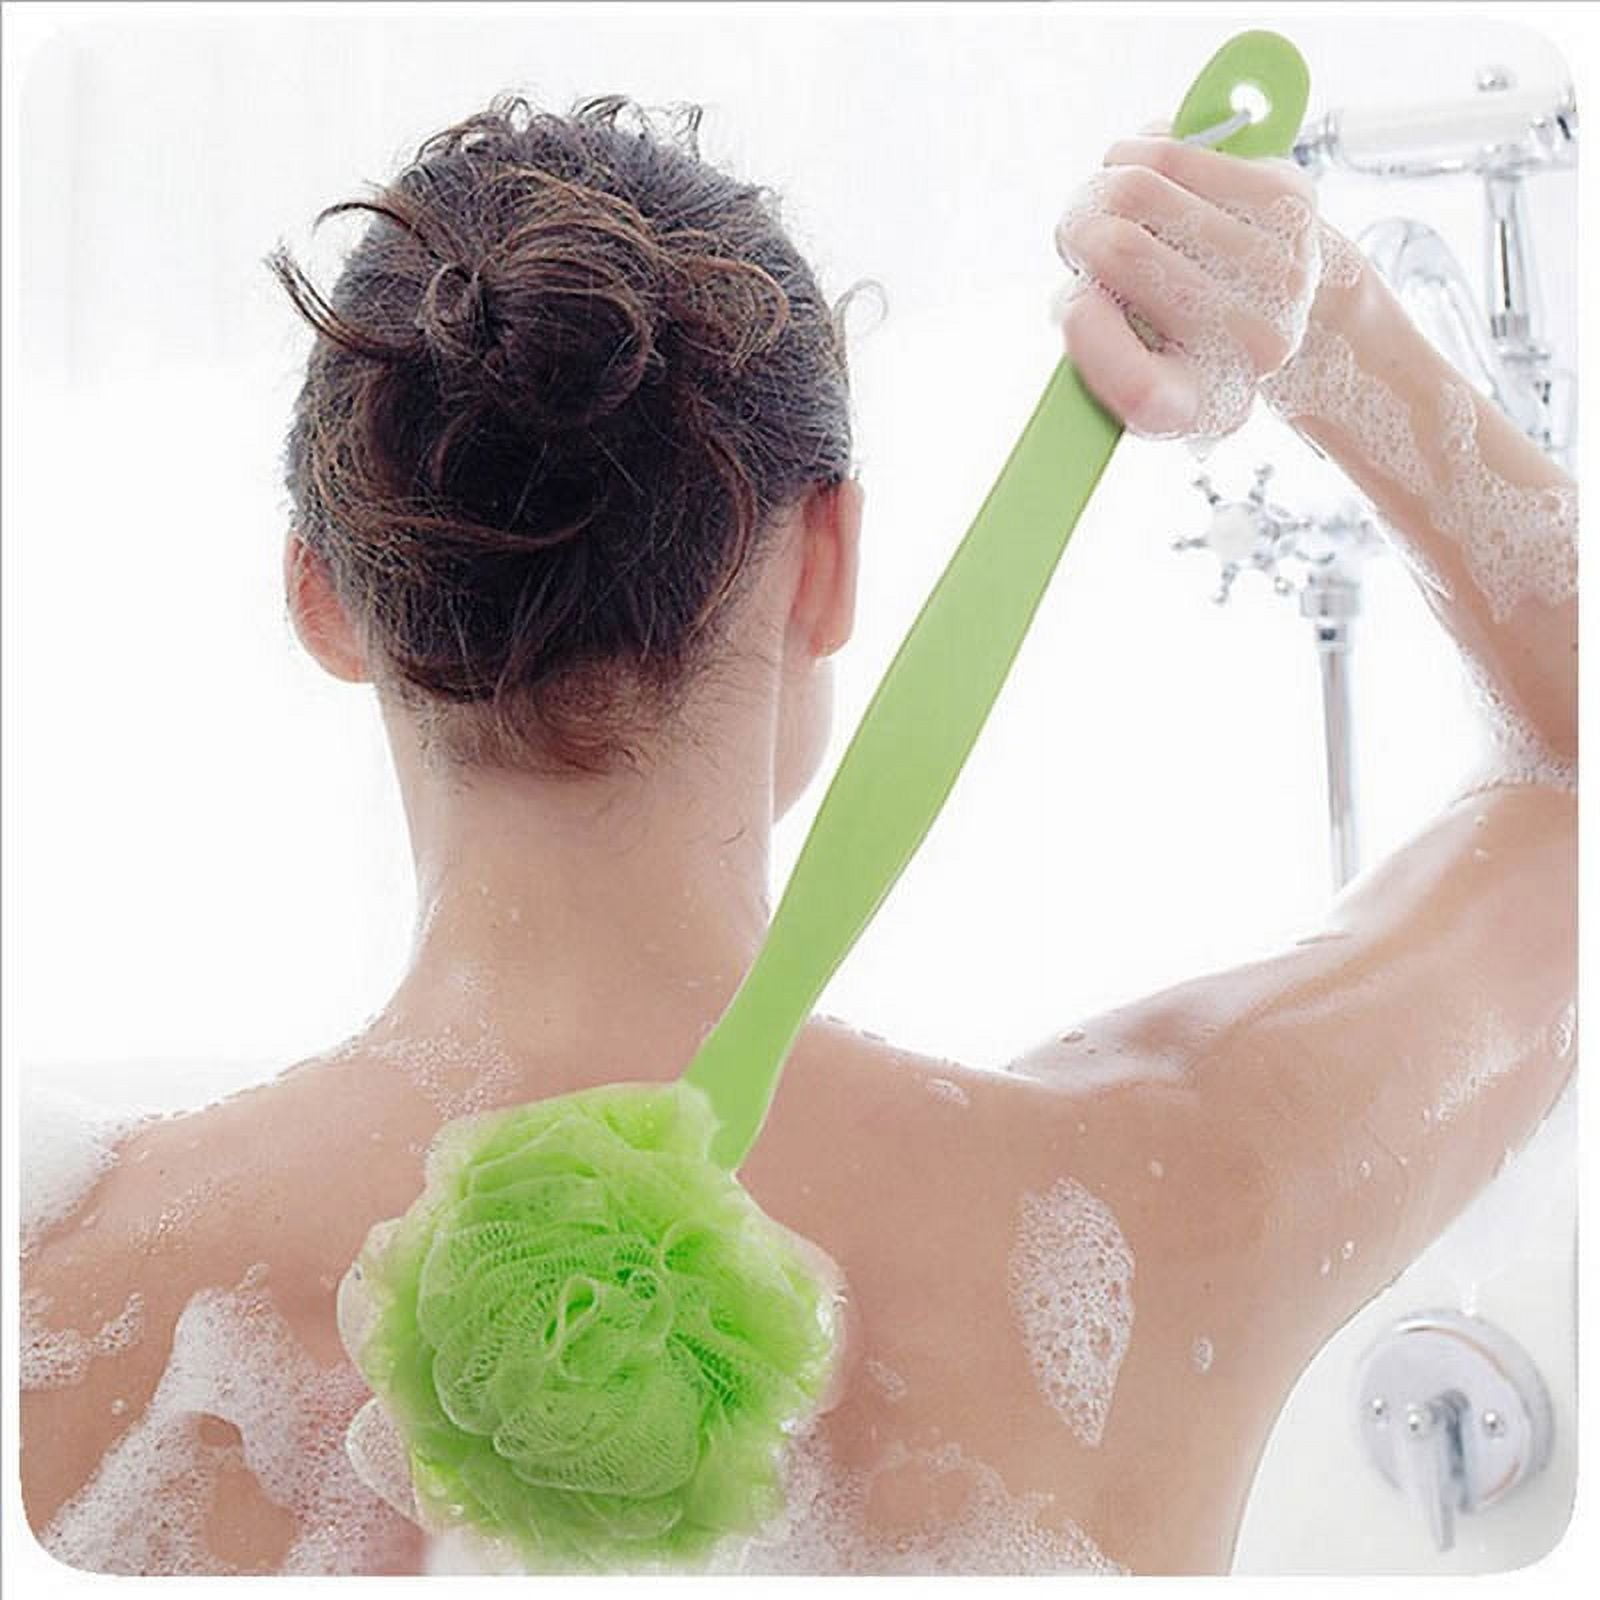 Unique Bargains Back Scrubber for Shower Bath Brush with Bristles and  Loofah Shower with Long Handle for Skin Exfoliating Blue White 2pcs